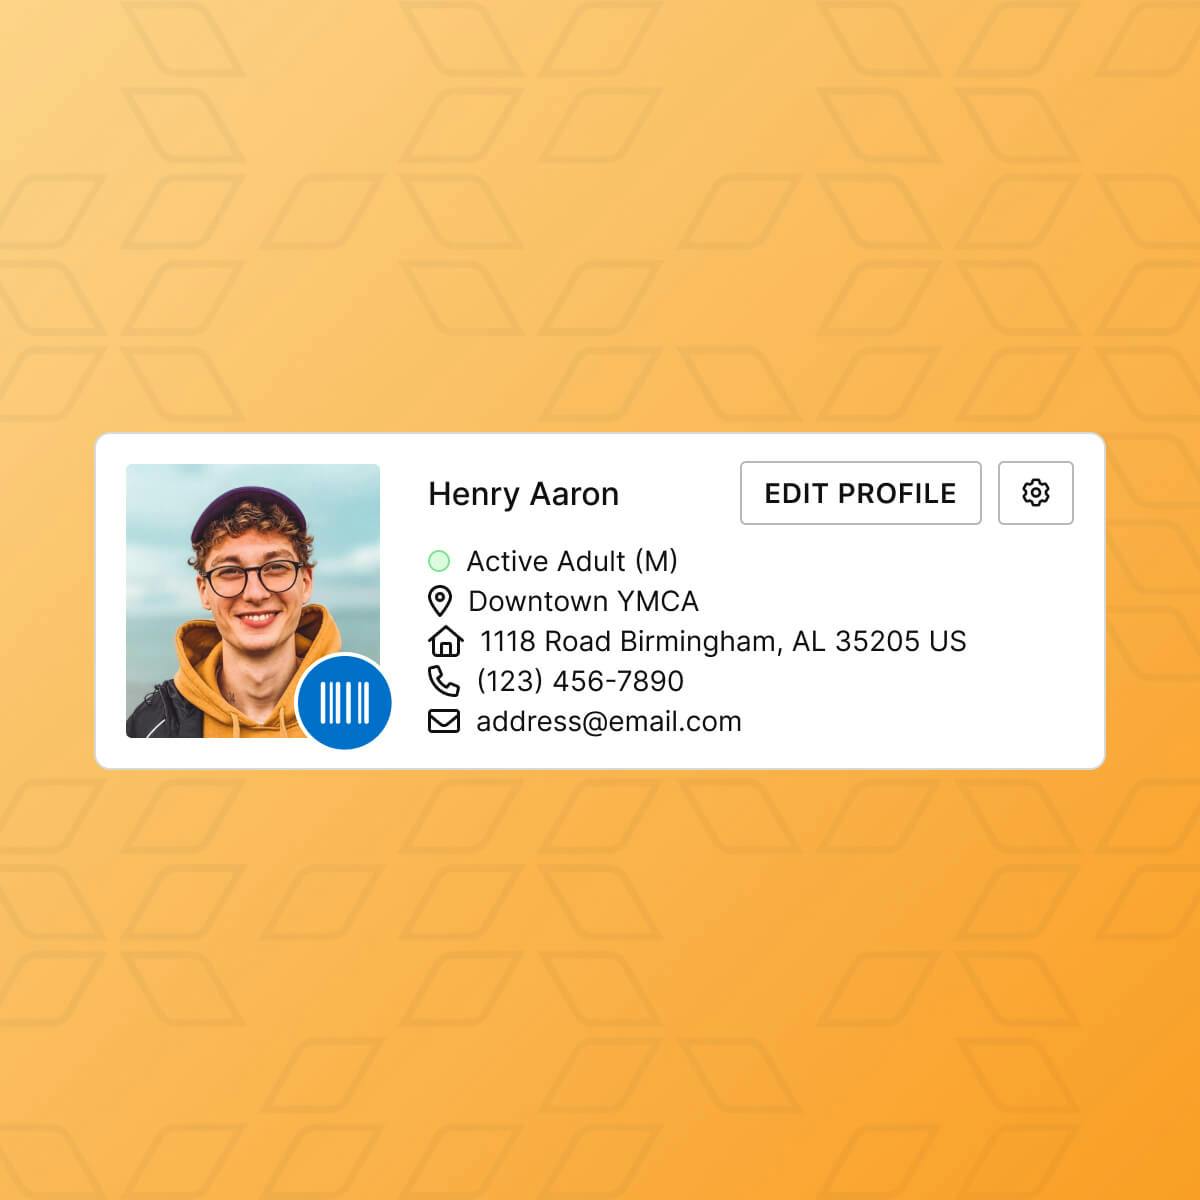 Henry Aaron's user profile on Daxko's nonprofit CRM software, demonstrating easy data management and reporting capabilities.